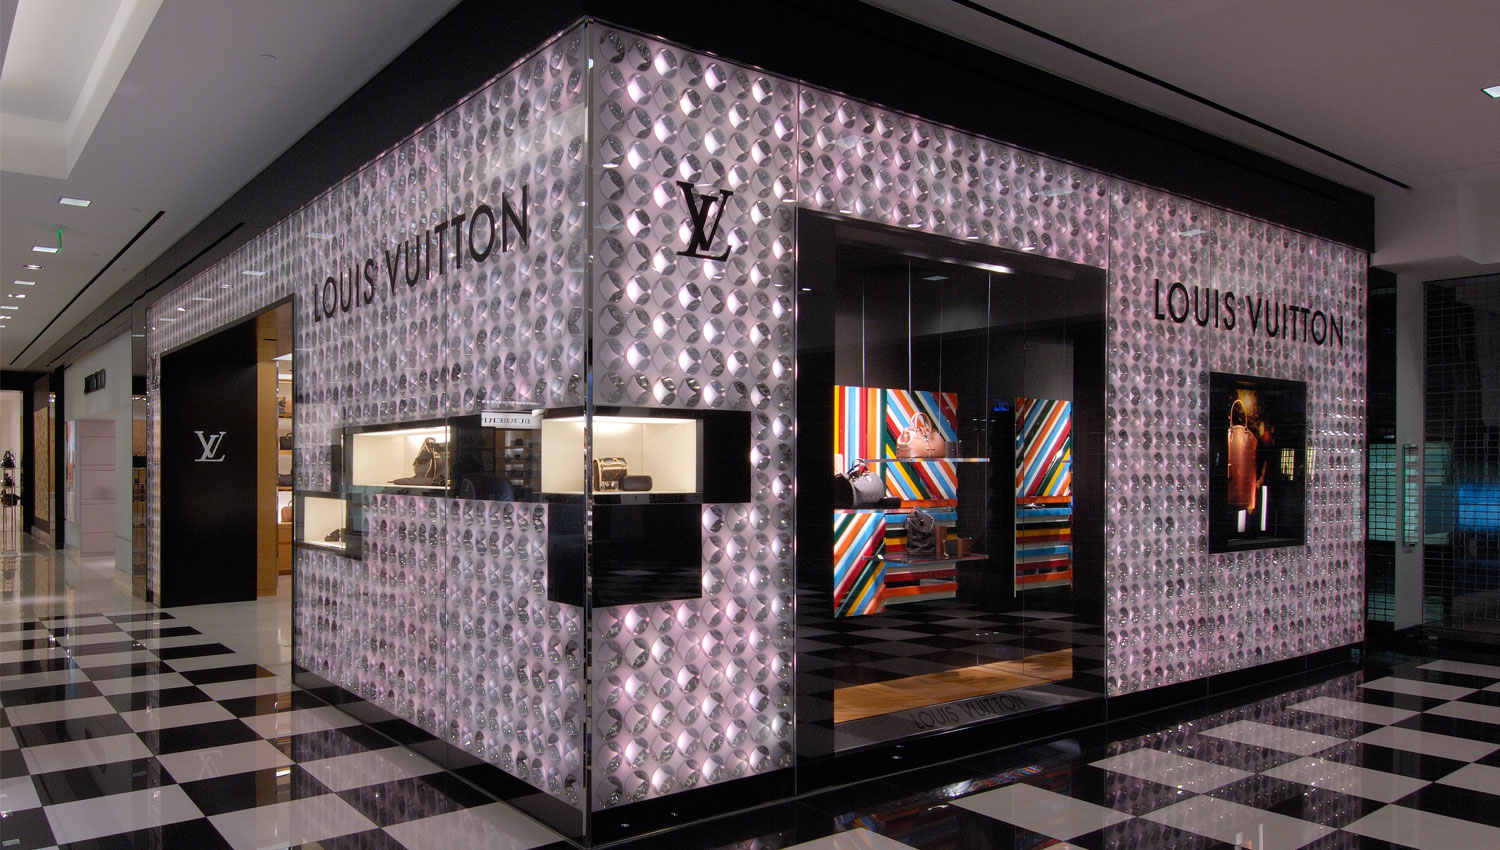 A creative lie lands thieves thousands of dollars in Louis Vuitton